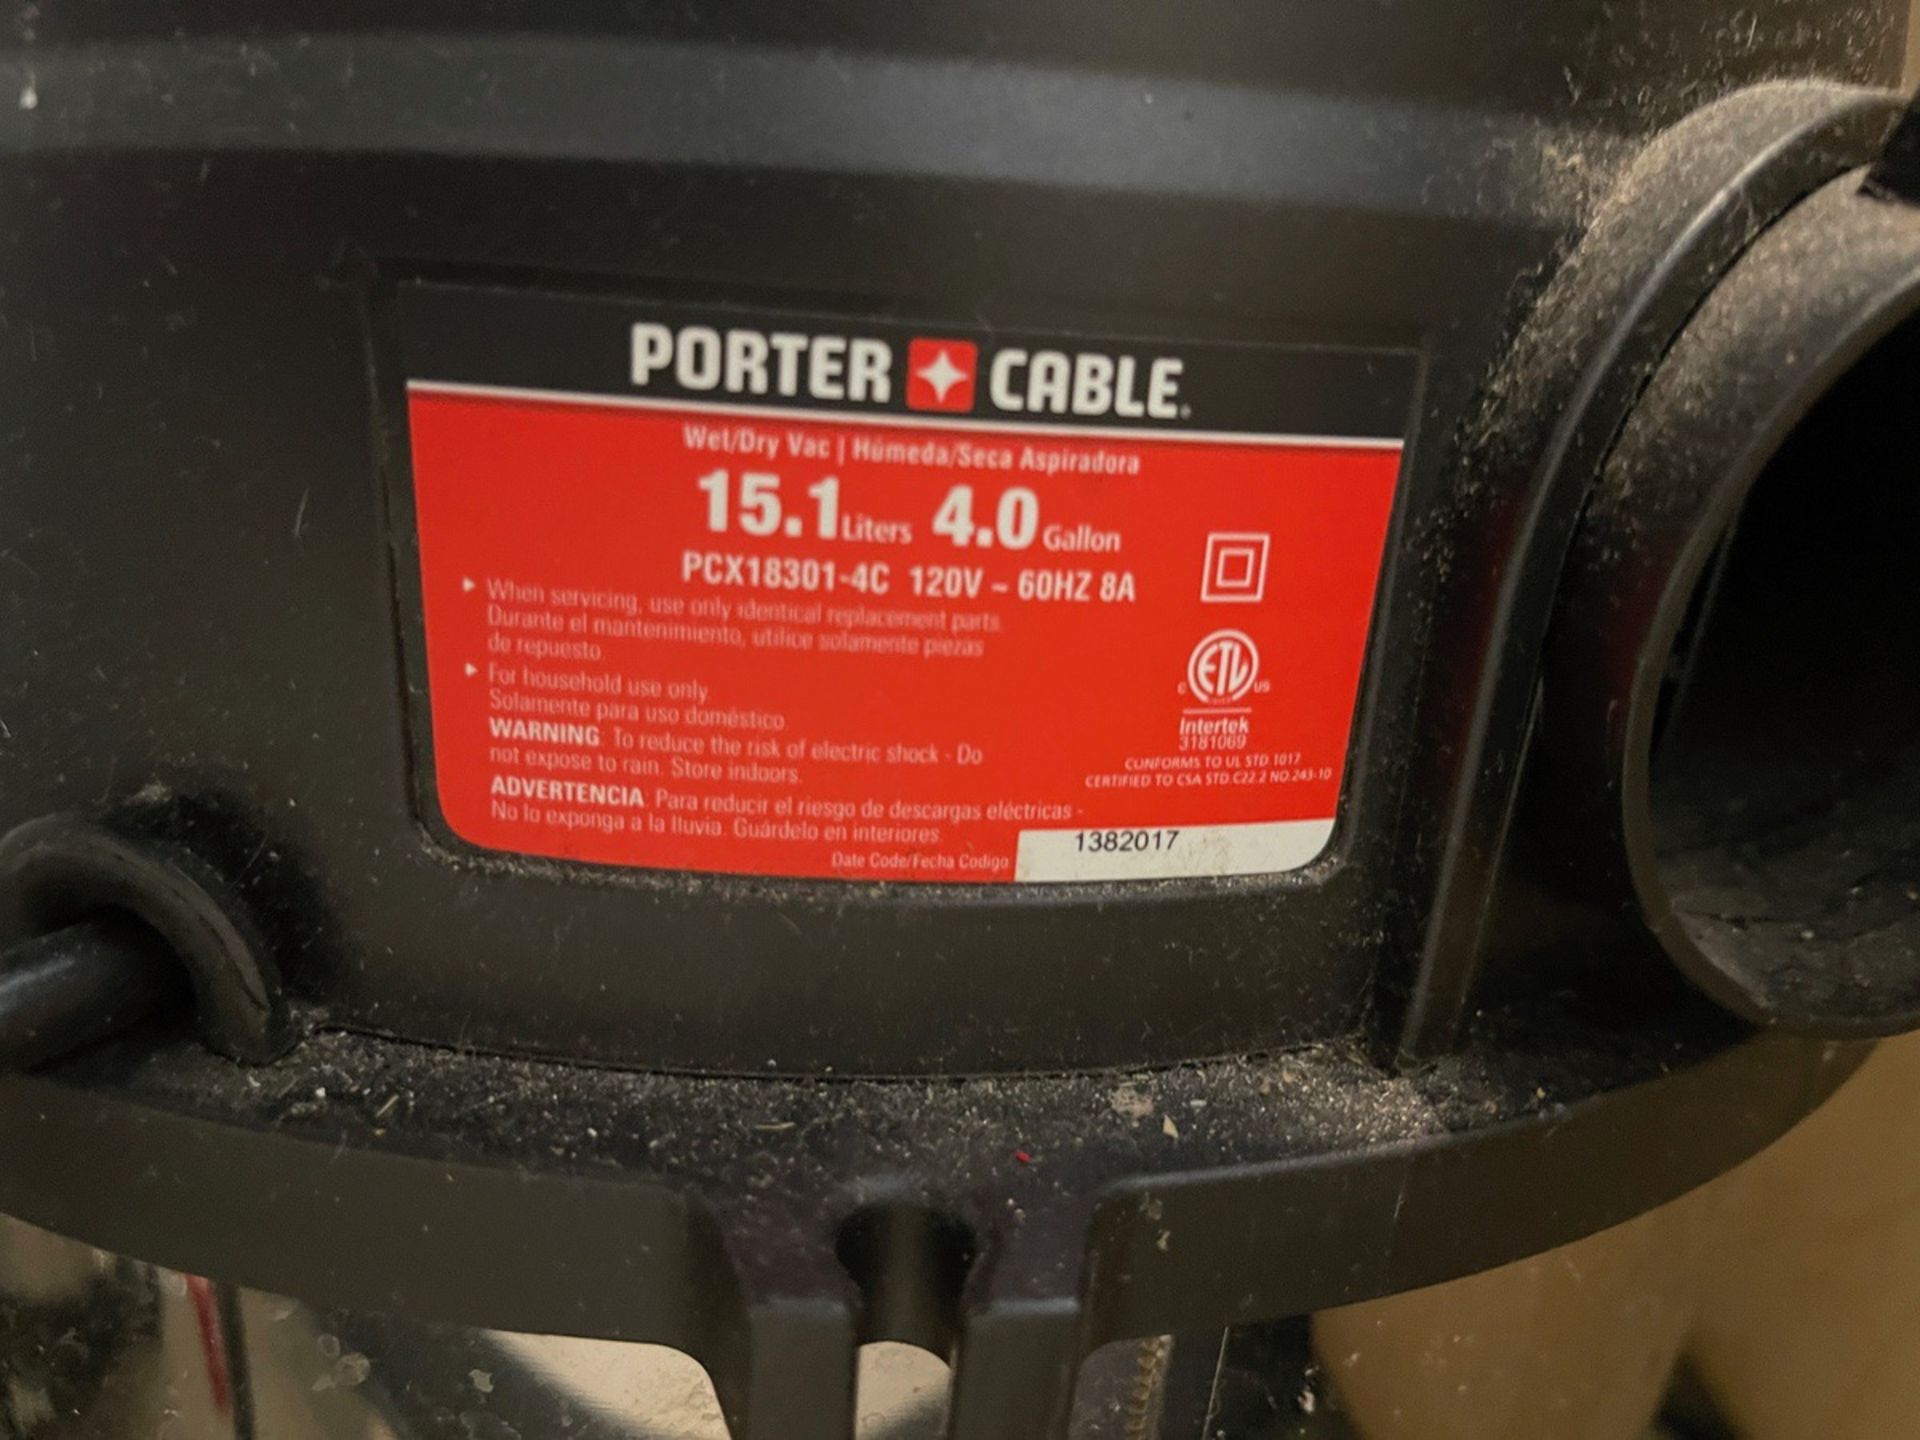 Porter Cable 4 Gallon Wet/Dry Vac | Rig Fee $No Charge - Image 2 of 2